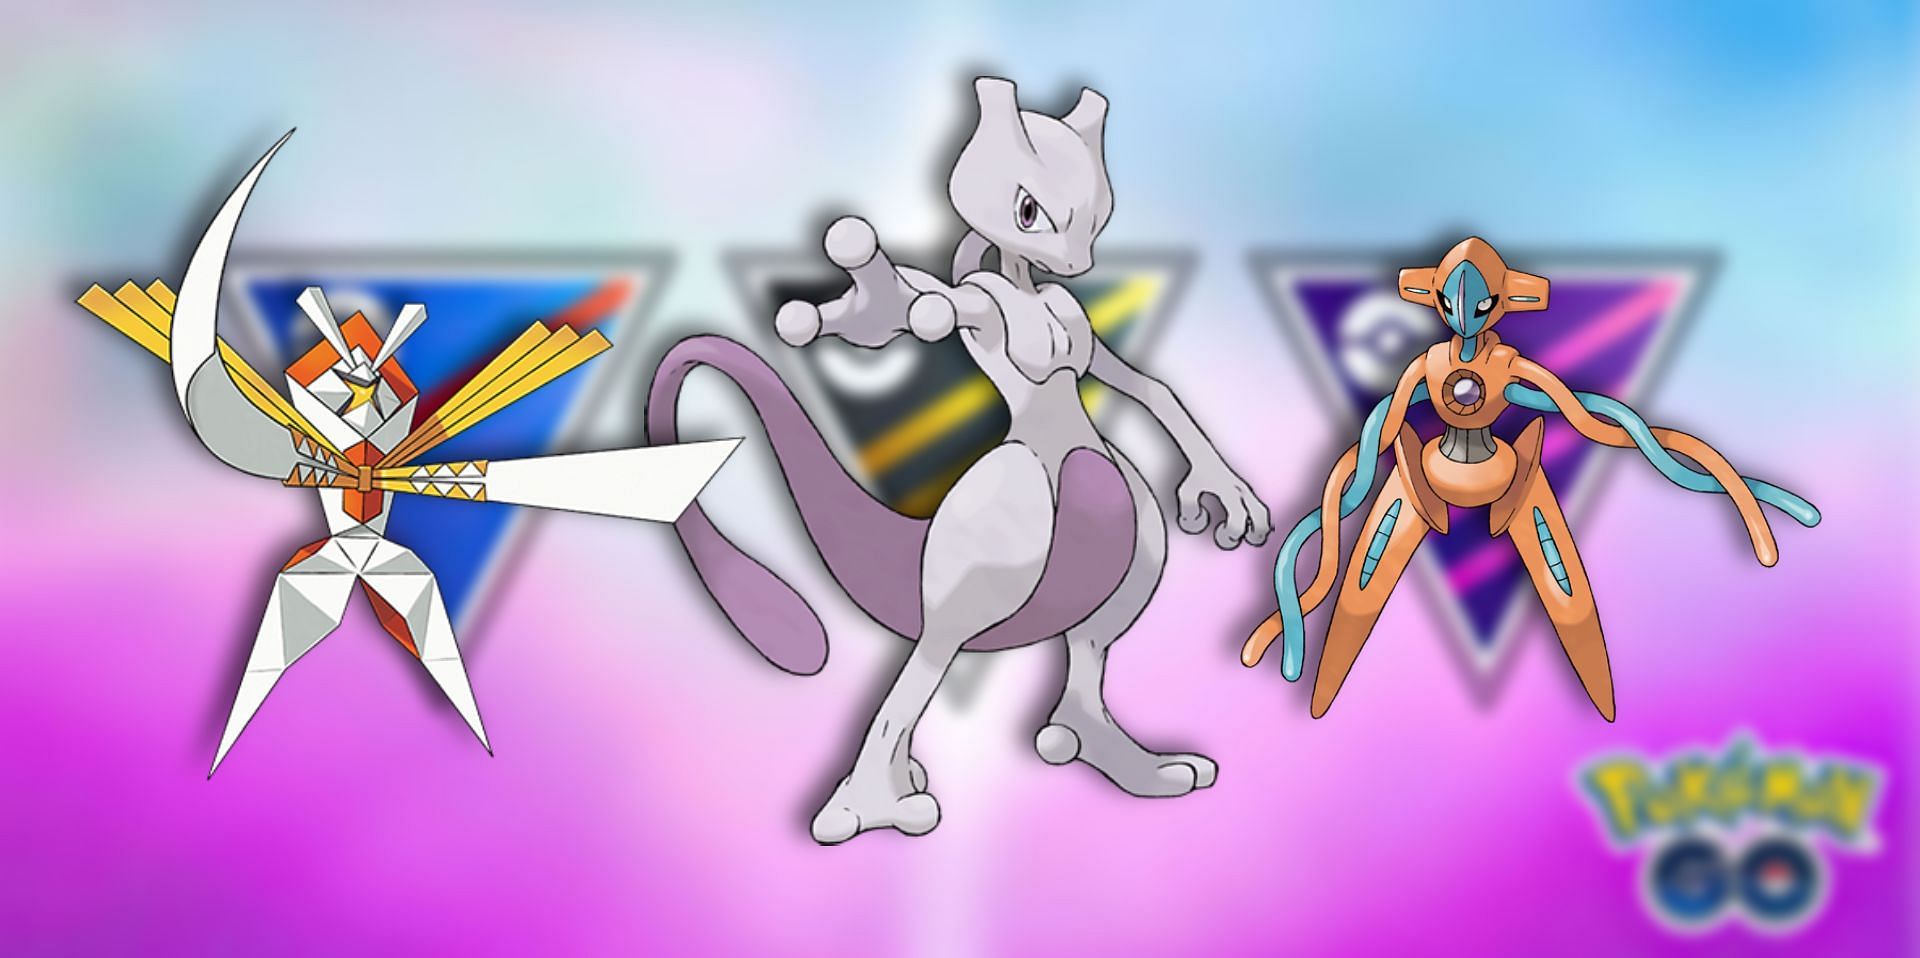 Mewtwo Does SO MUCH Damage // Master League // Pokemon GO Battle